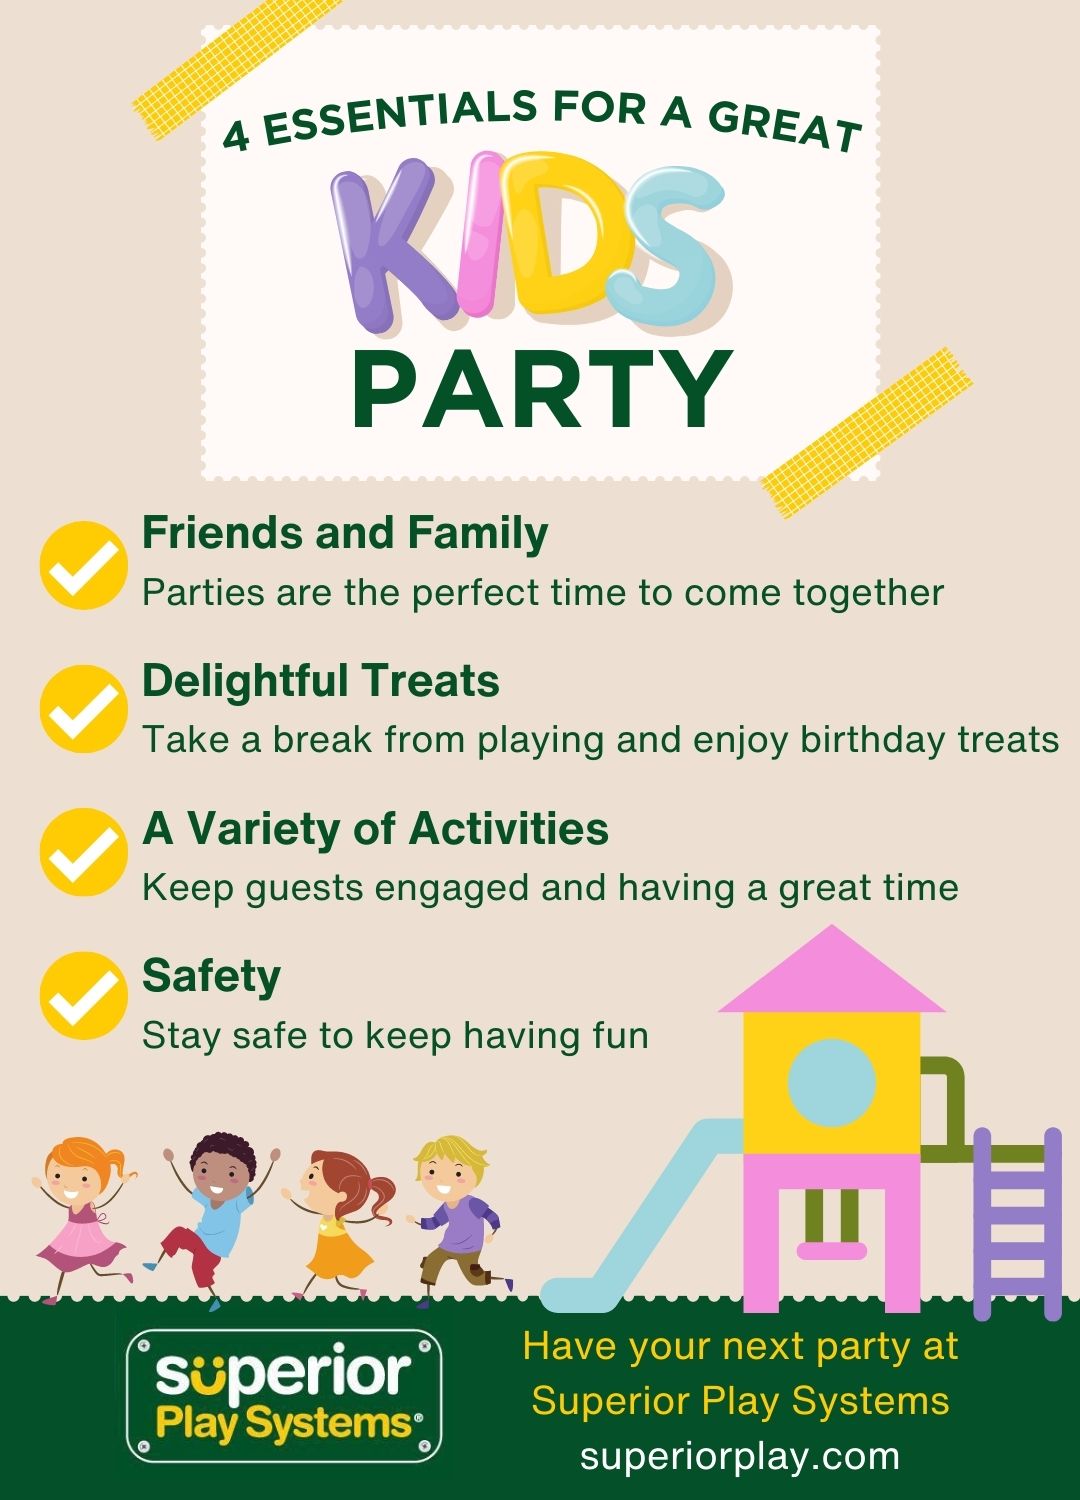 Essentials For a Great kids Party infographic